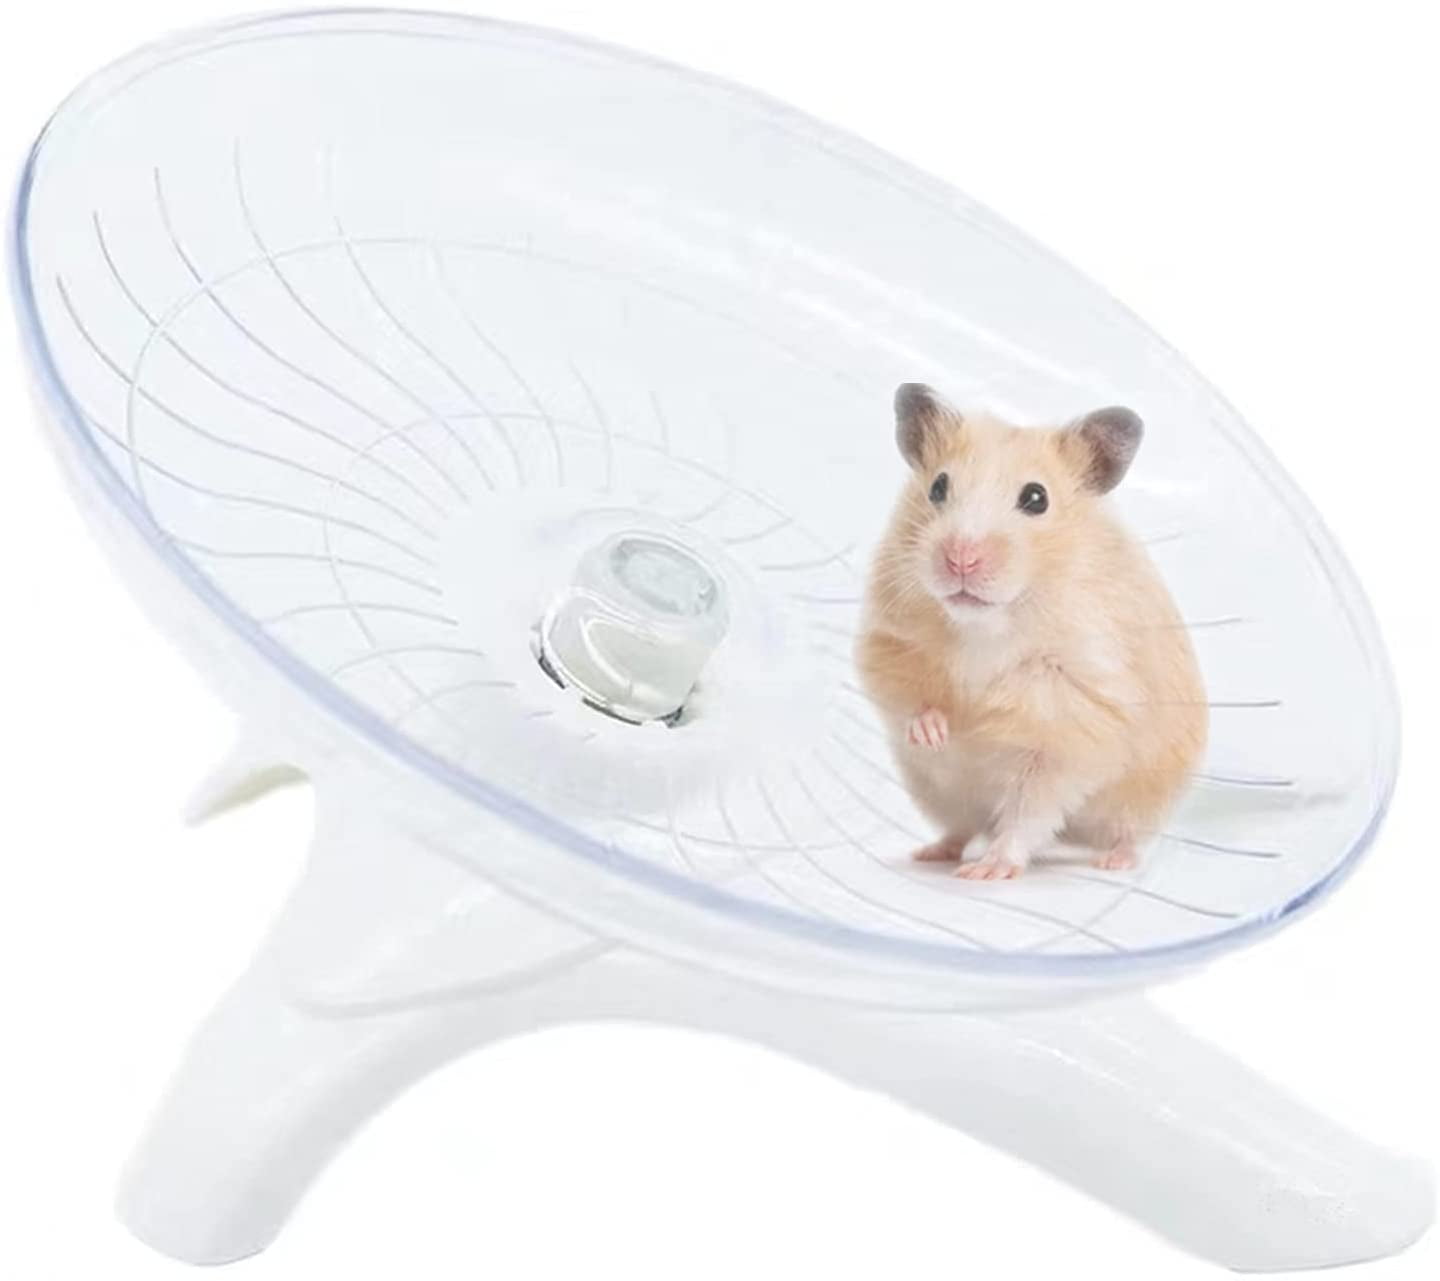 Winter Warm Bed House Cage Toys Cute Hammock for Little Hamster Rats 4.3L x 4.3W x 3.15H 